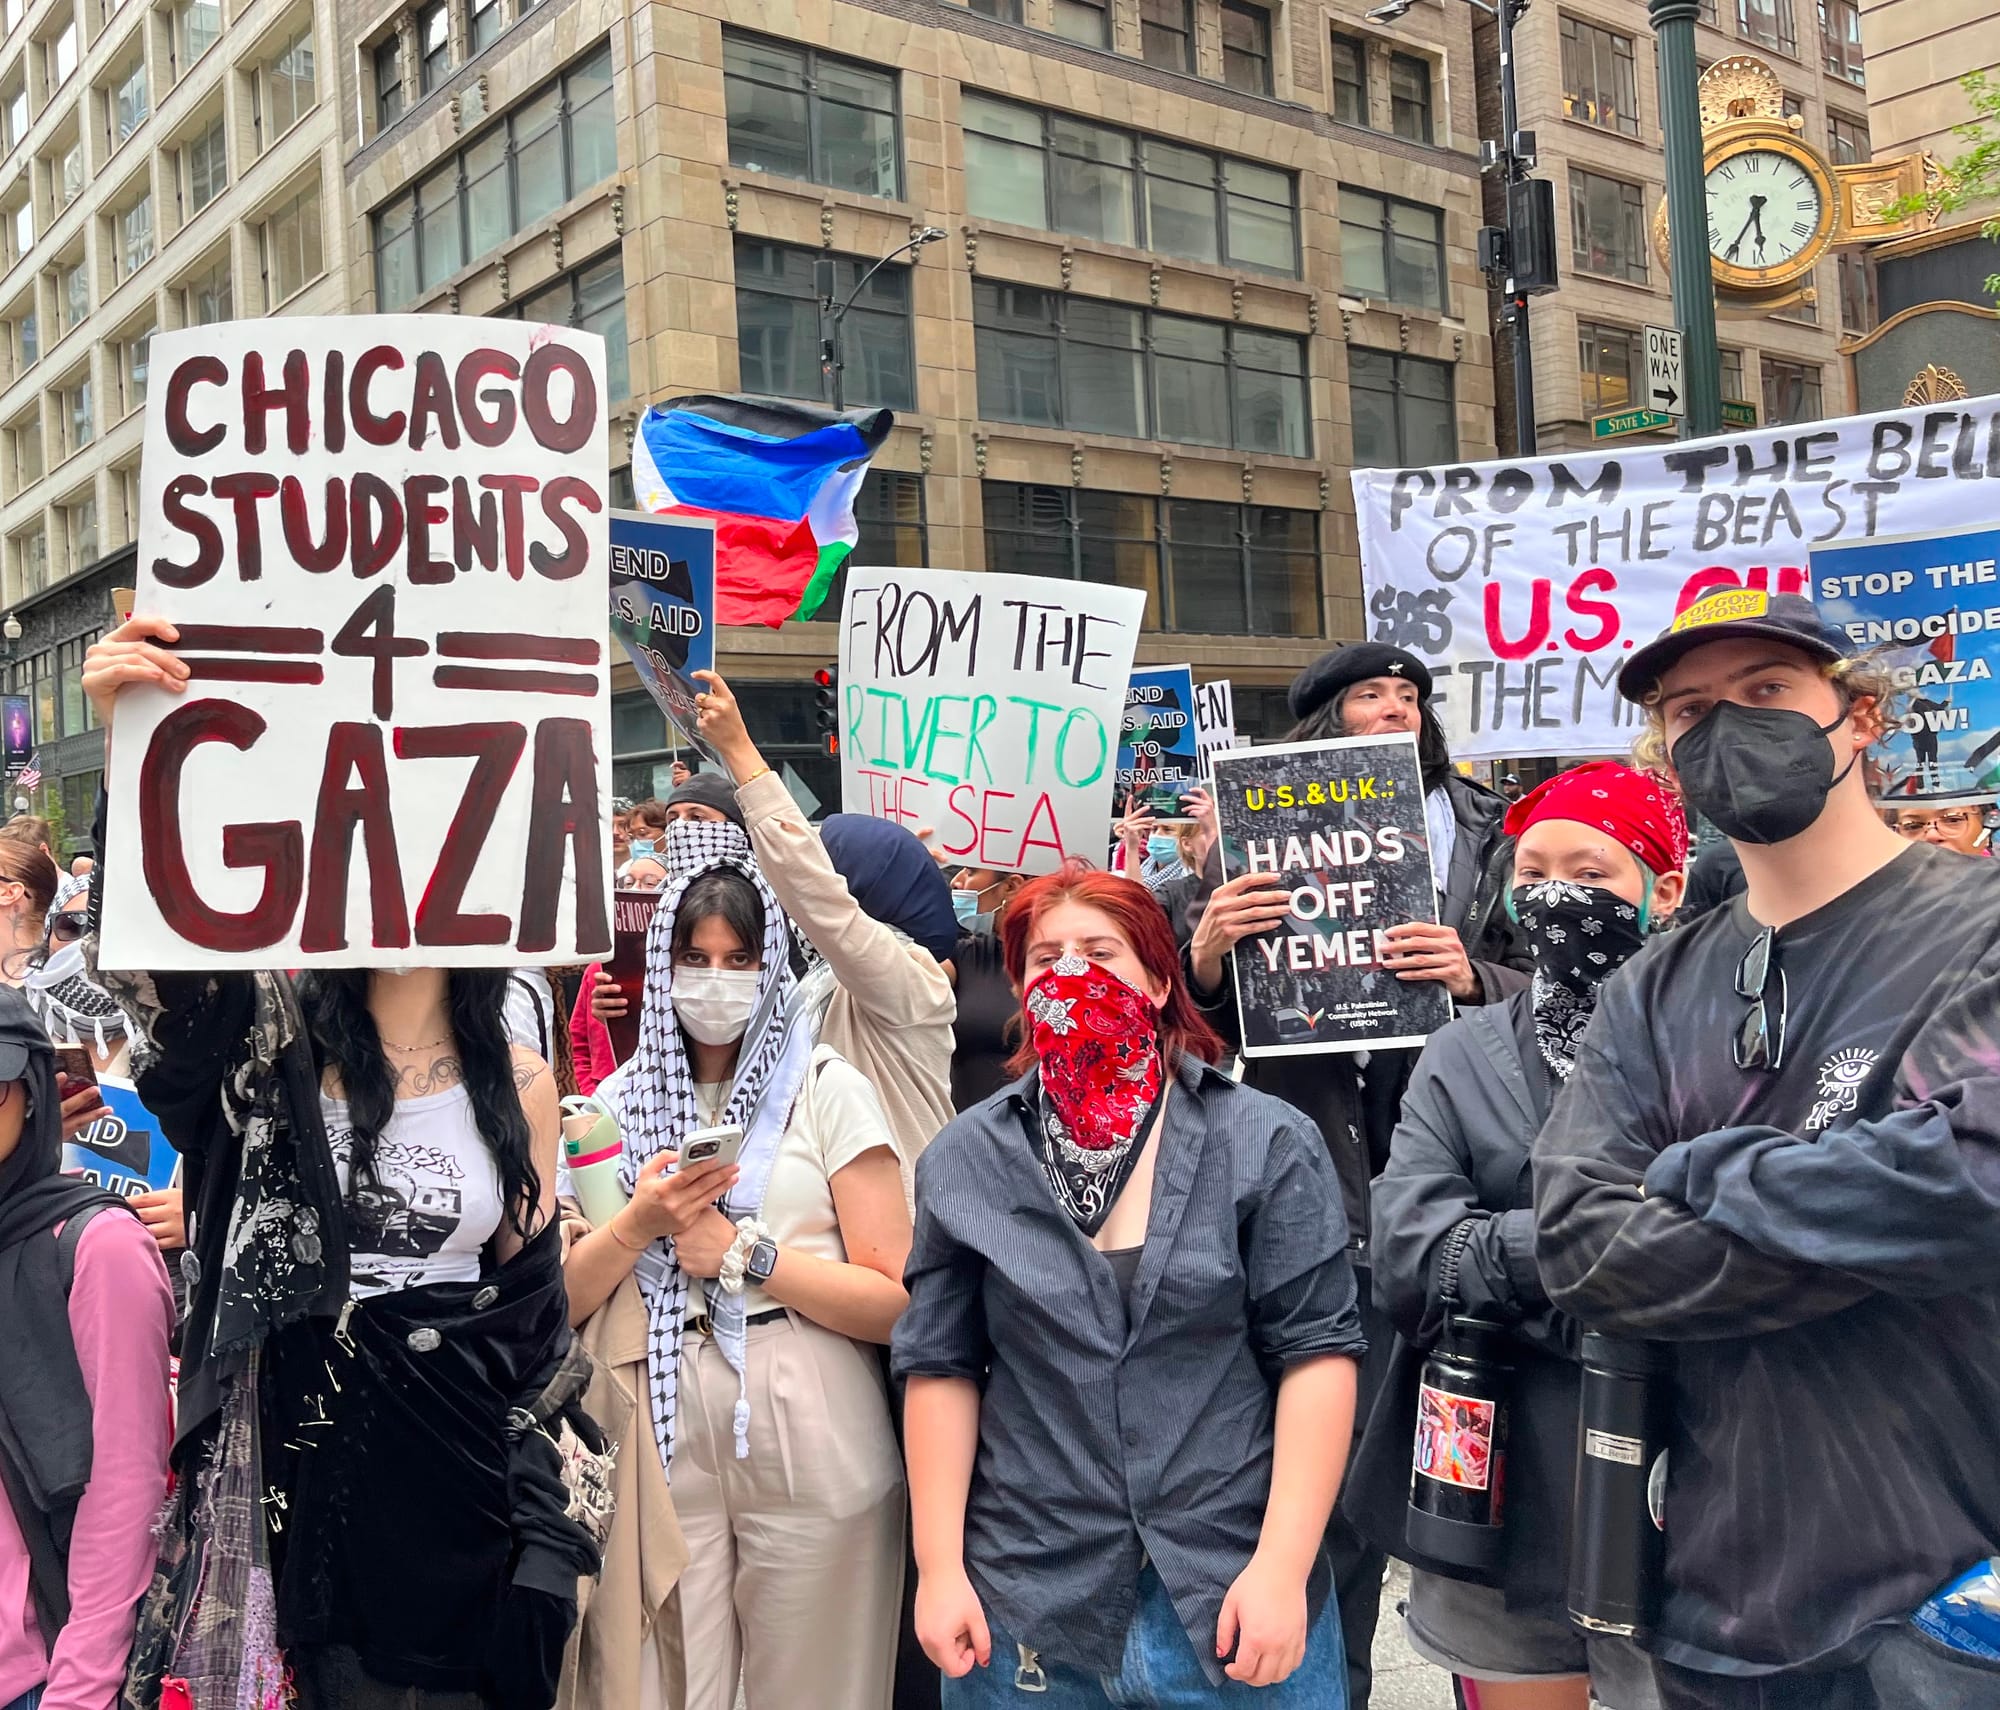 Masked protesters hold signs in the street. One reads, "Chicago students 4 Gaza."